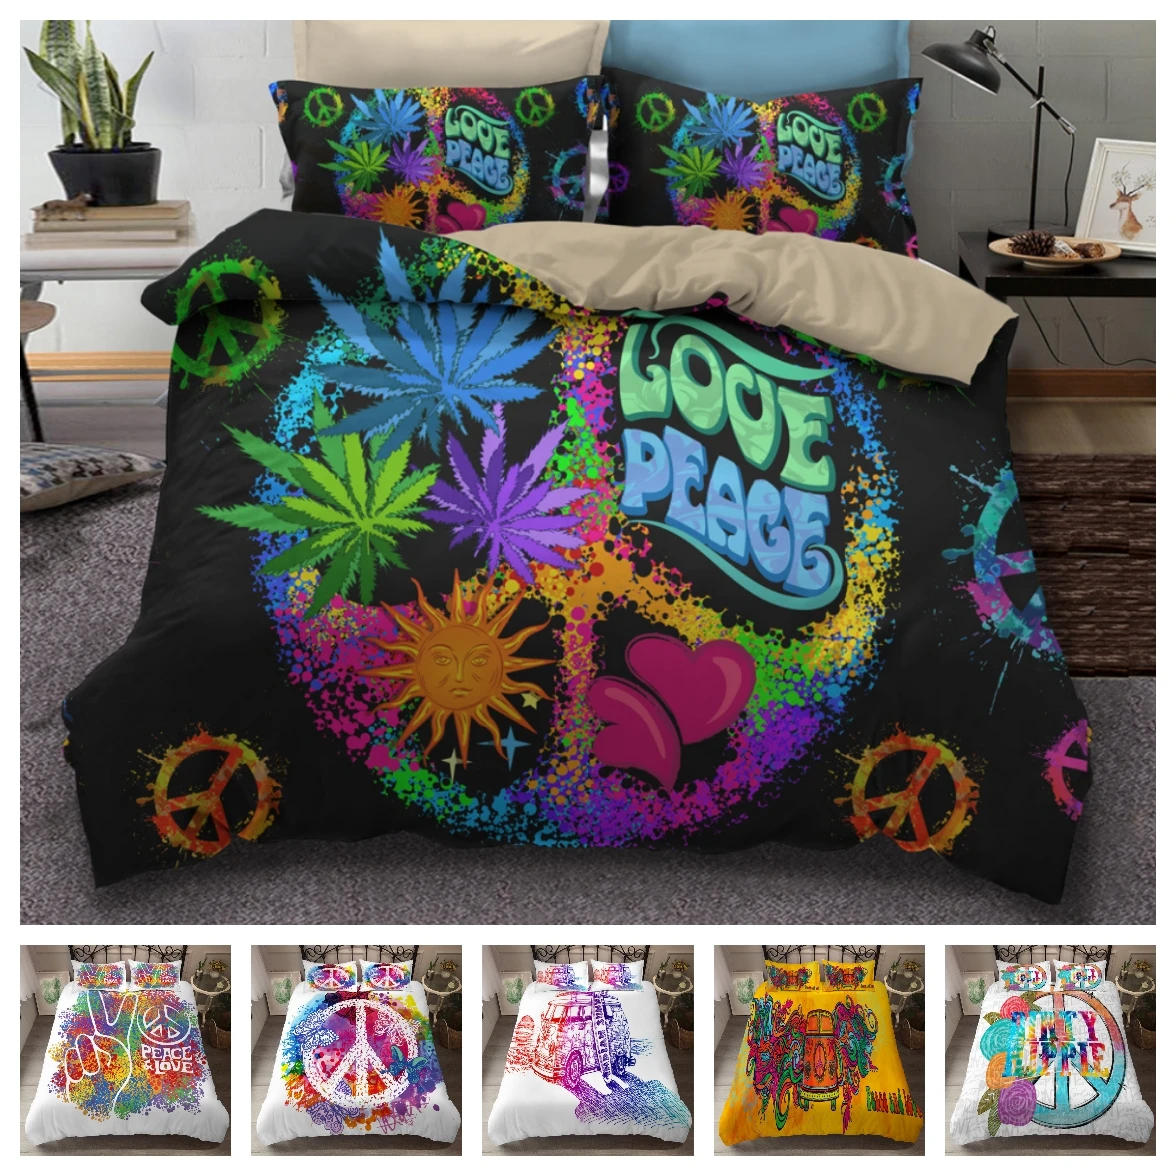 

2021 Hot Style Bedding Set 3d Digital Peace Printing 2/3pcs Duvet Cover Set Single Twin Double Full Queen King Bedroom Decor